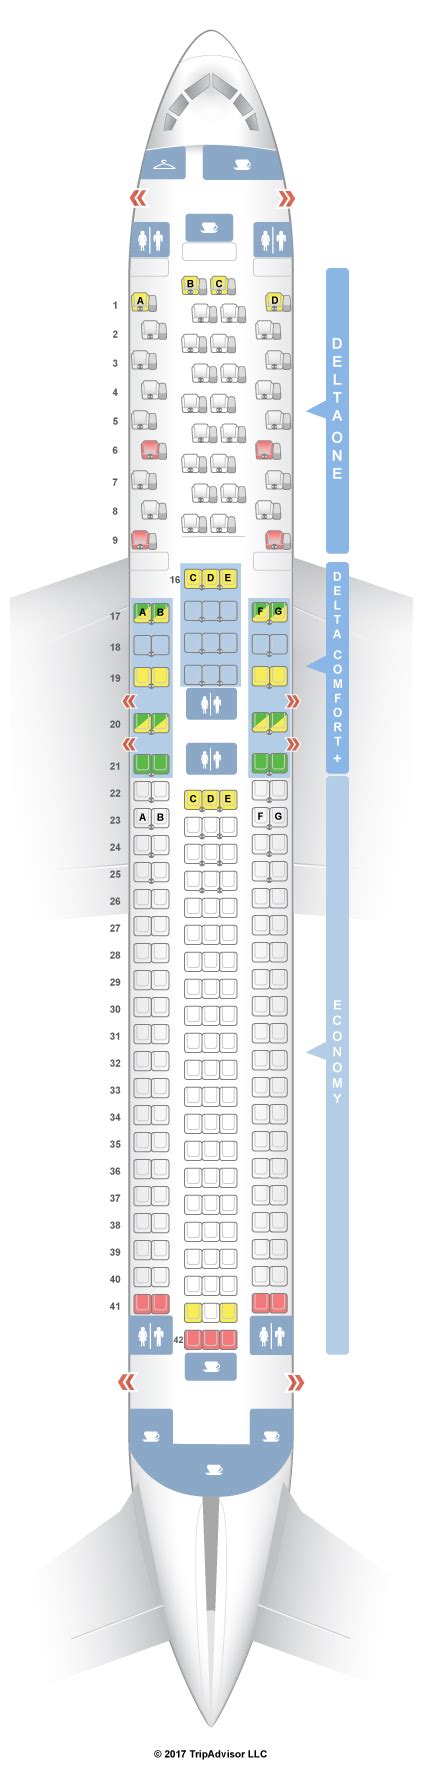 Delta Airlines describes their Airbus A220-100 aircraft as a "state-of-the-art narrowbody jet with all of the amenities and luxury of a widebody aircraft." The interior design of the aircraft is a result of Delta's research asking passengers about their onboard preferences. All seats feature high-resolution entertainment monitors and personal .... 